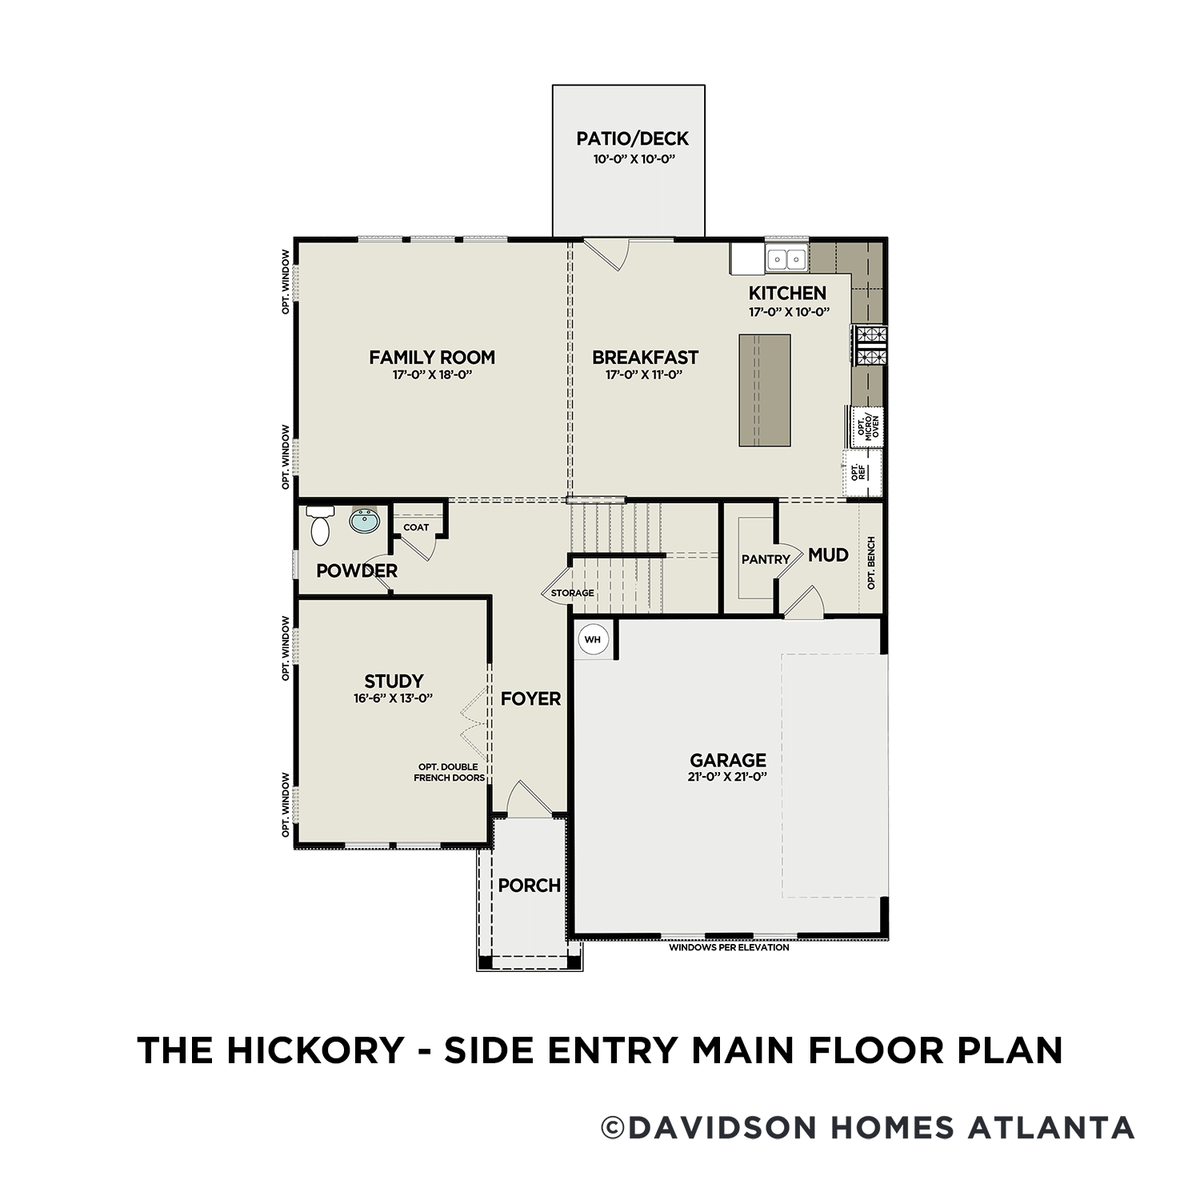 1 - The Hickory B – Side Entry buildable floor plan layout in Davidson Homes' Mountainbrook community.